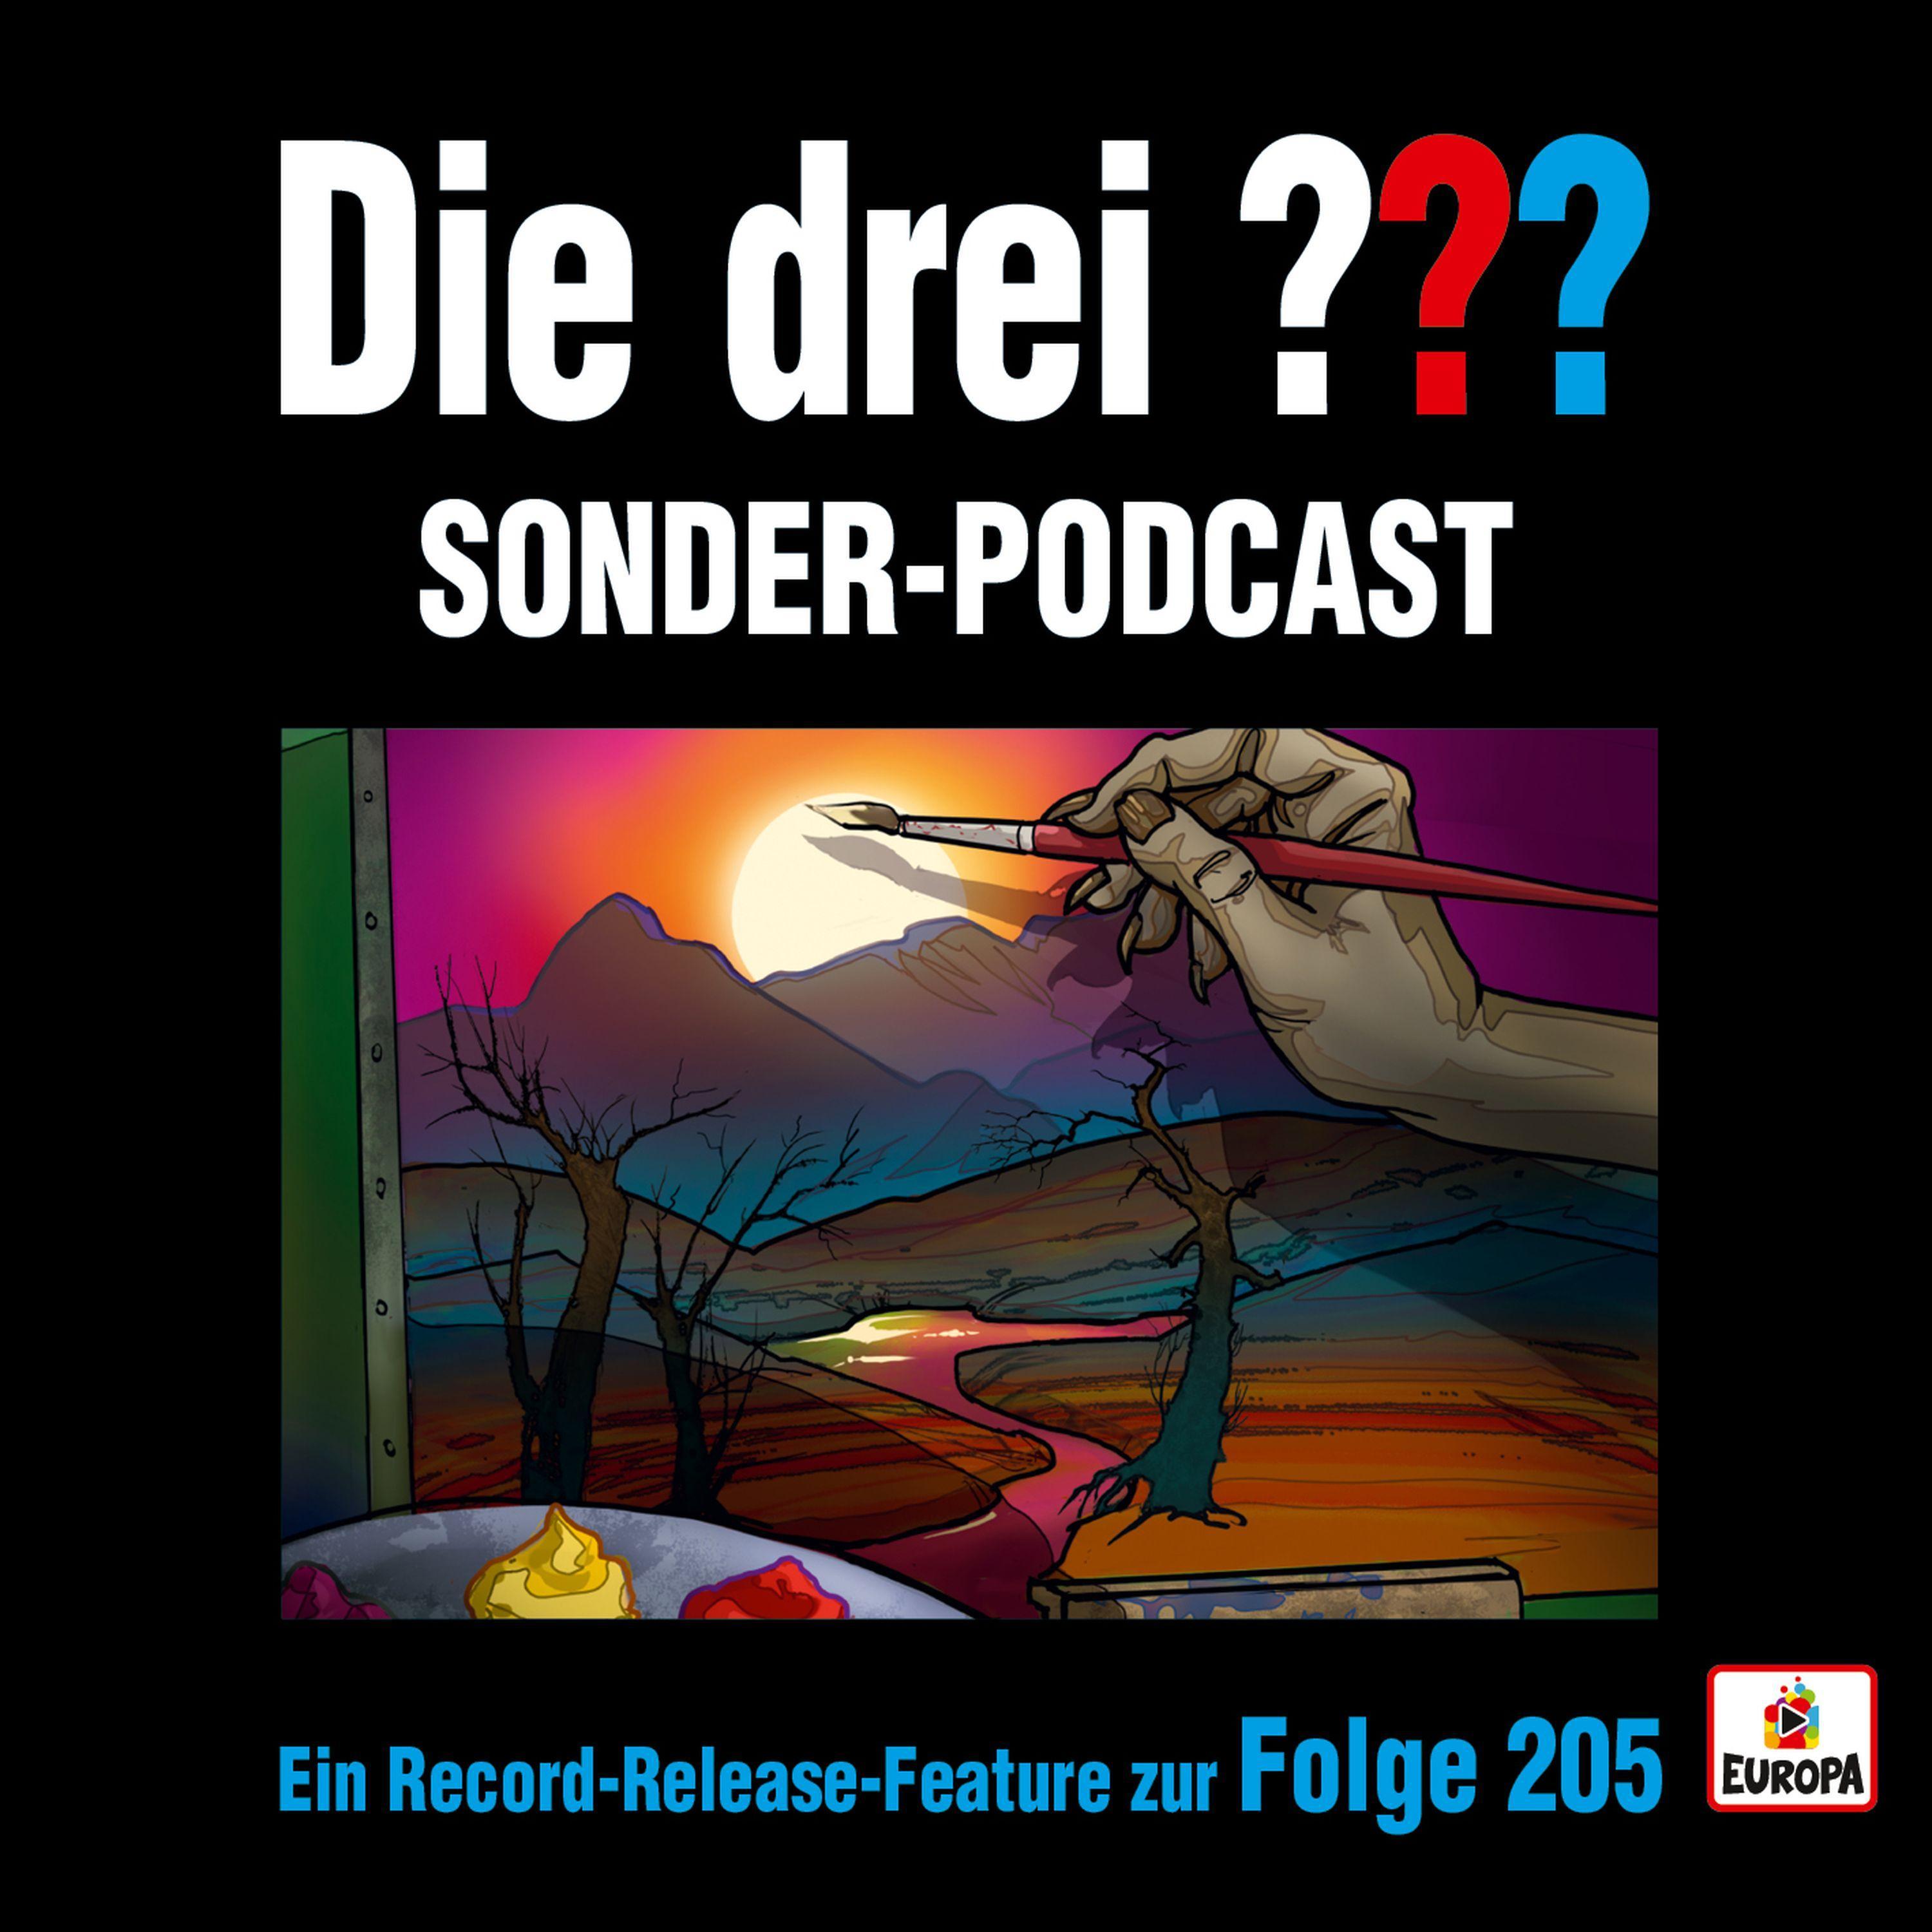 Record-Release-Feature zur Folge 205